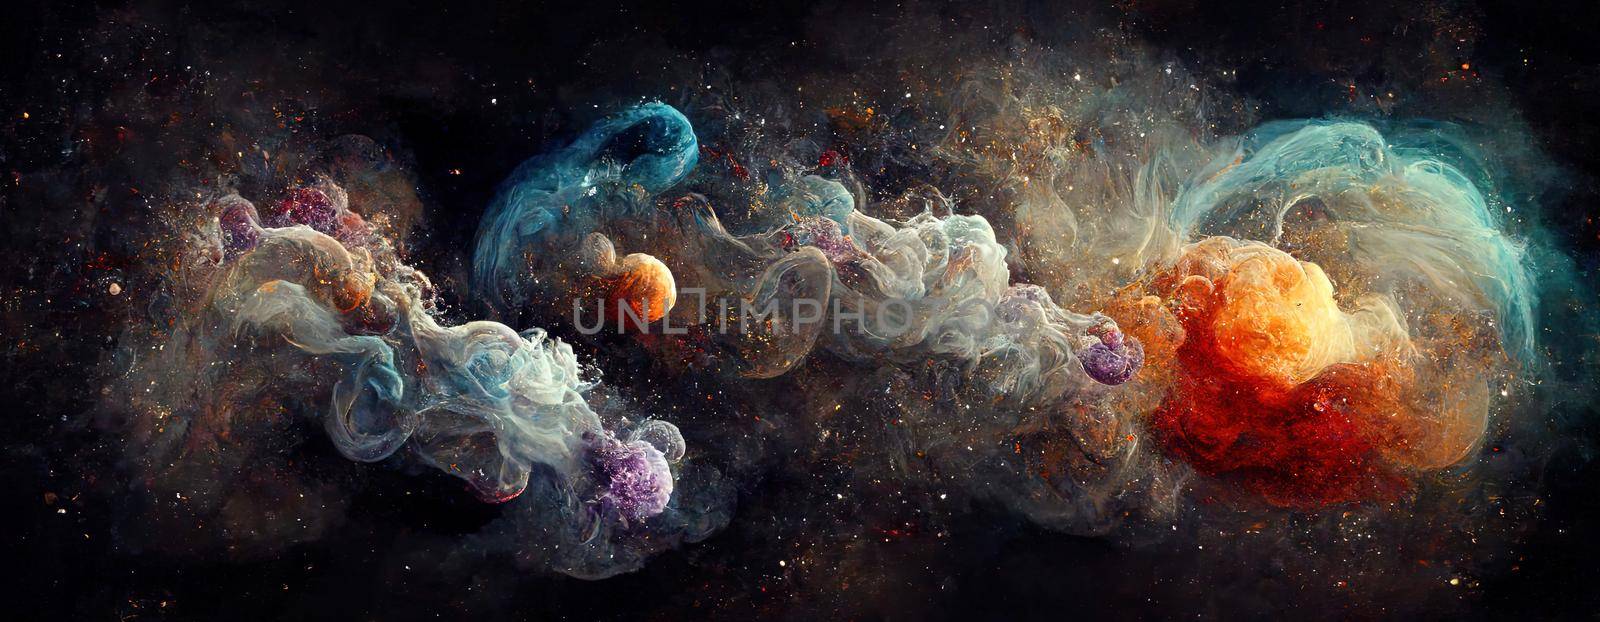 abstract space landscape with nebulae and stars on a black background by TRMK